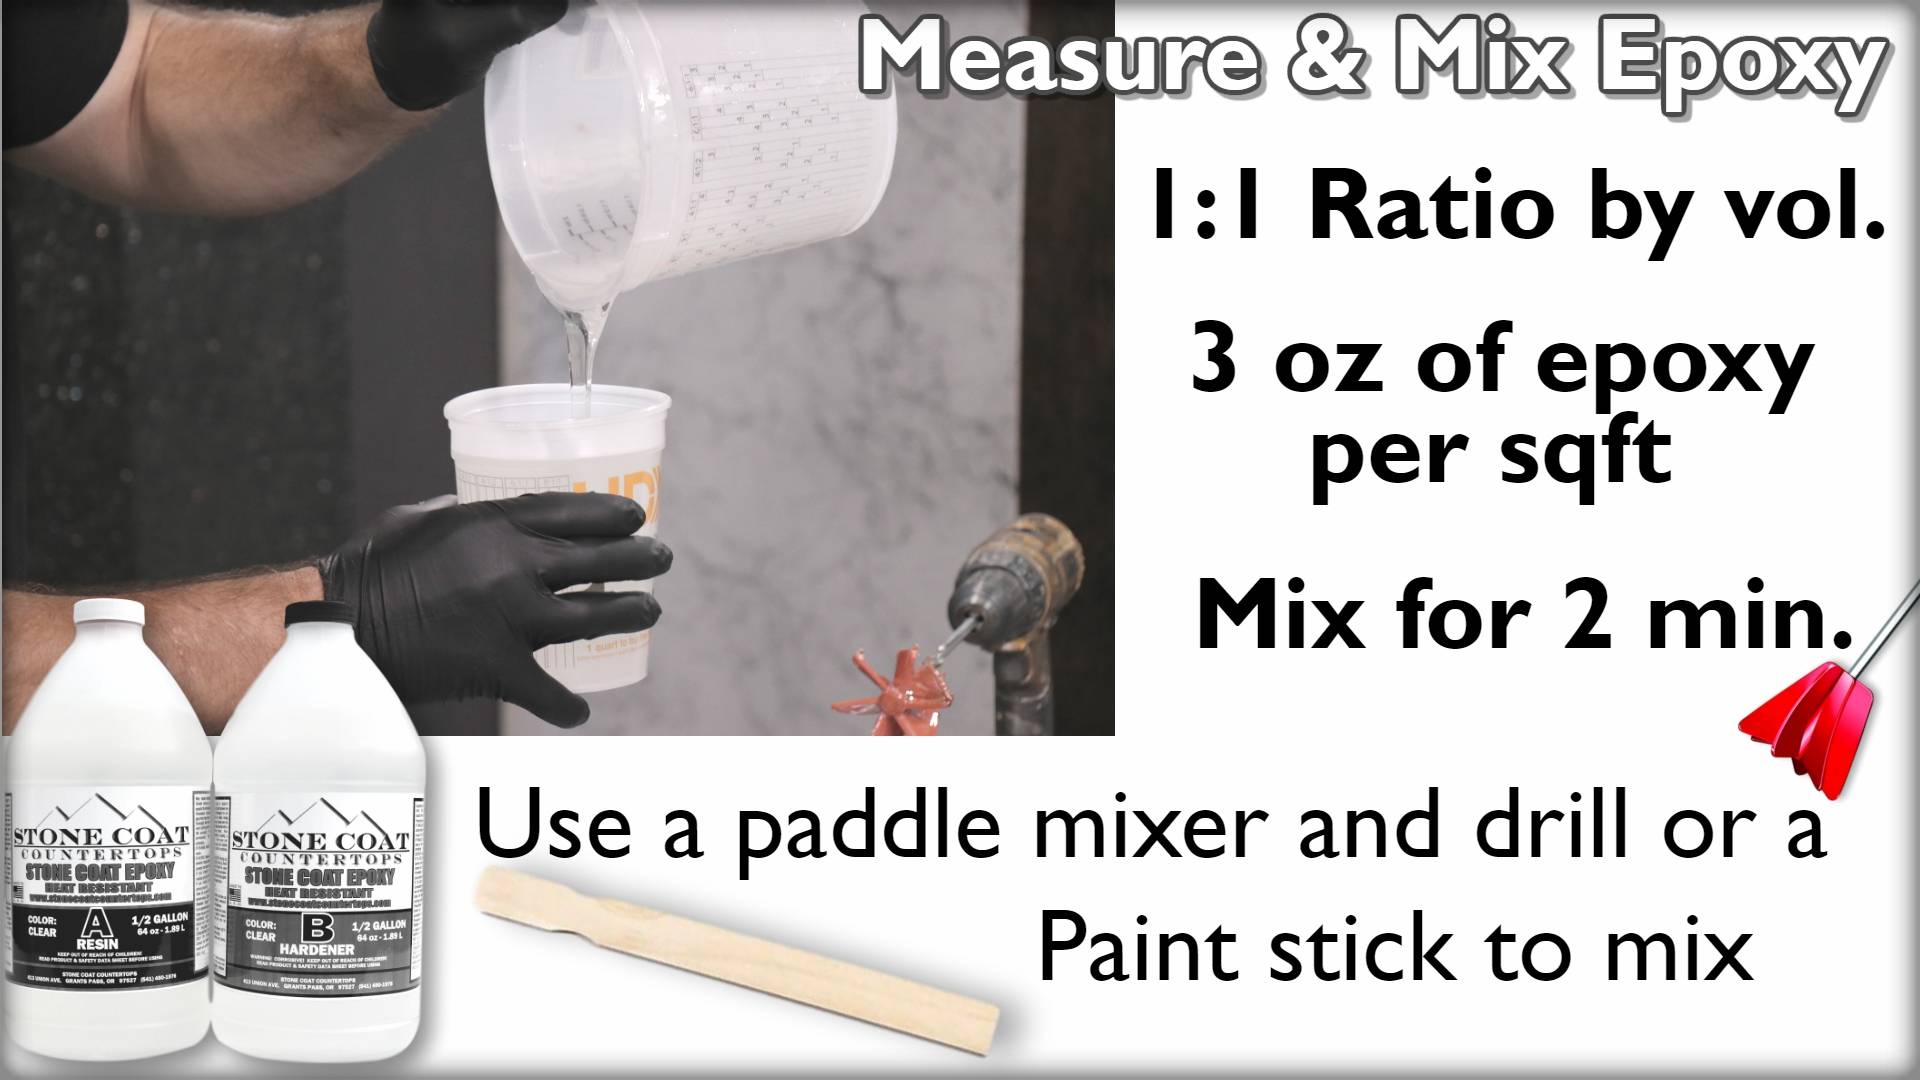 Measure & Mix Epoxy: 3 oz per sqft, mix for 2 min using a paddle mixer, drill, or paint stick.